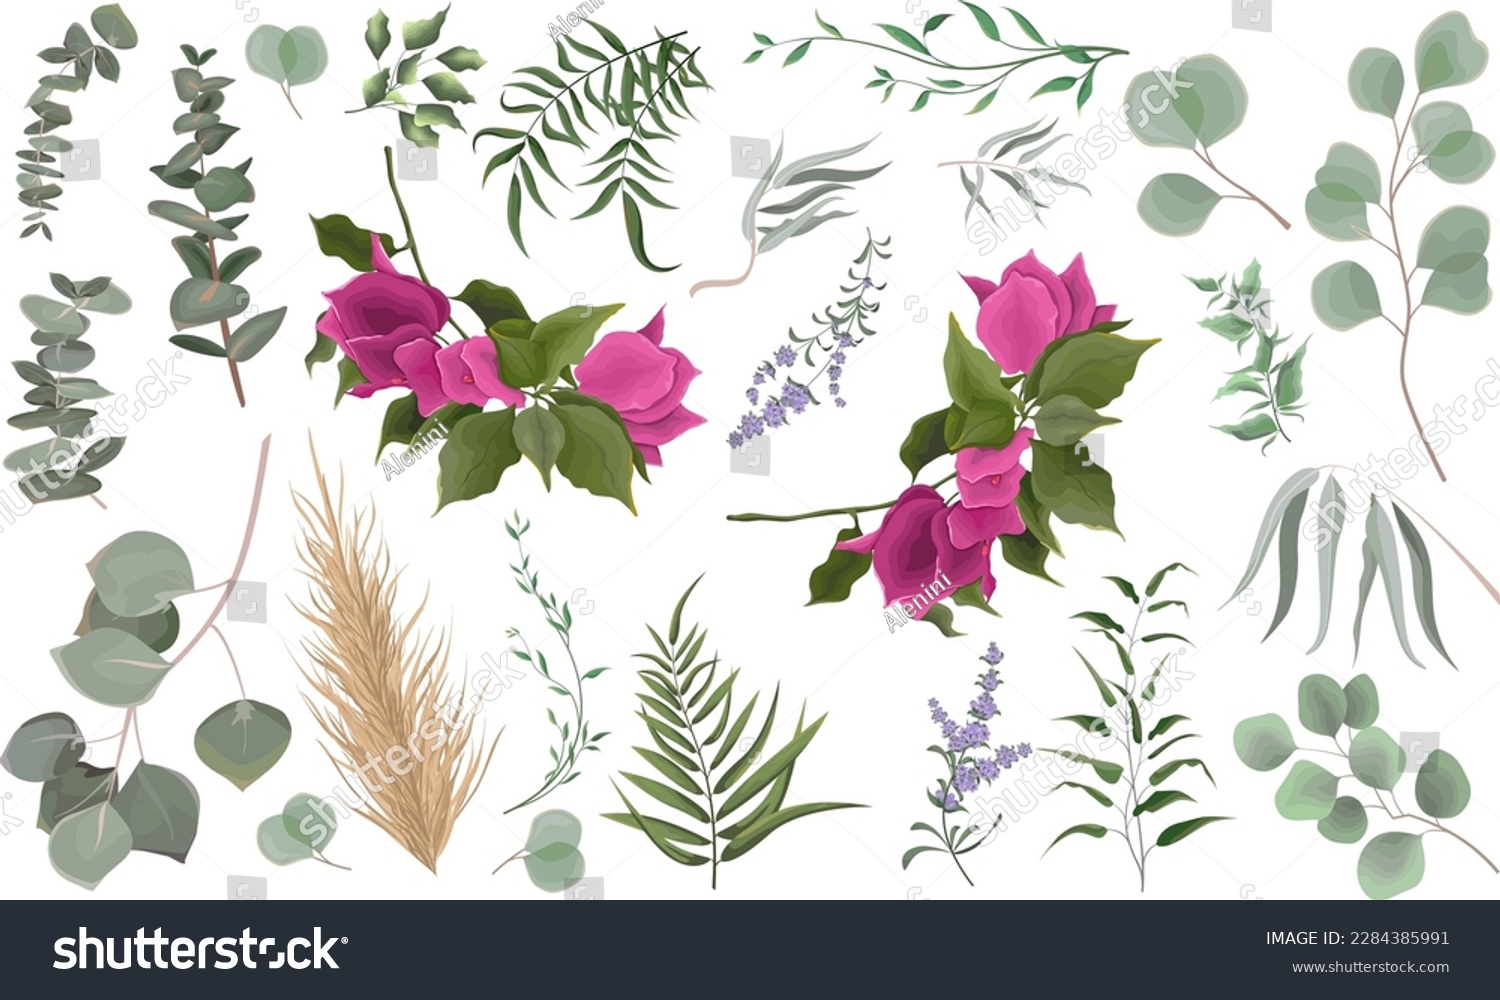 SVG of Mix of herbs and plants vector big collection. Juicy eucalyptus, deadwood, green plants and leaves. All elements are isolated. Branches of bright pink bougainvillea,  lavender.  svg